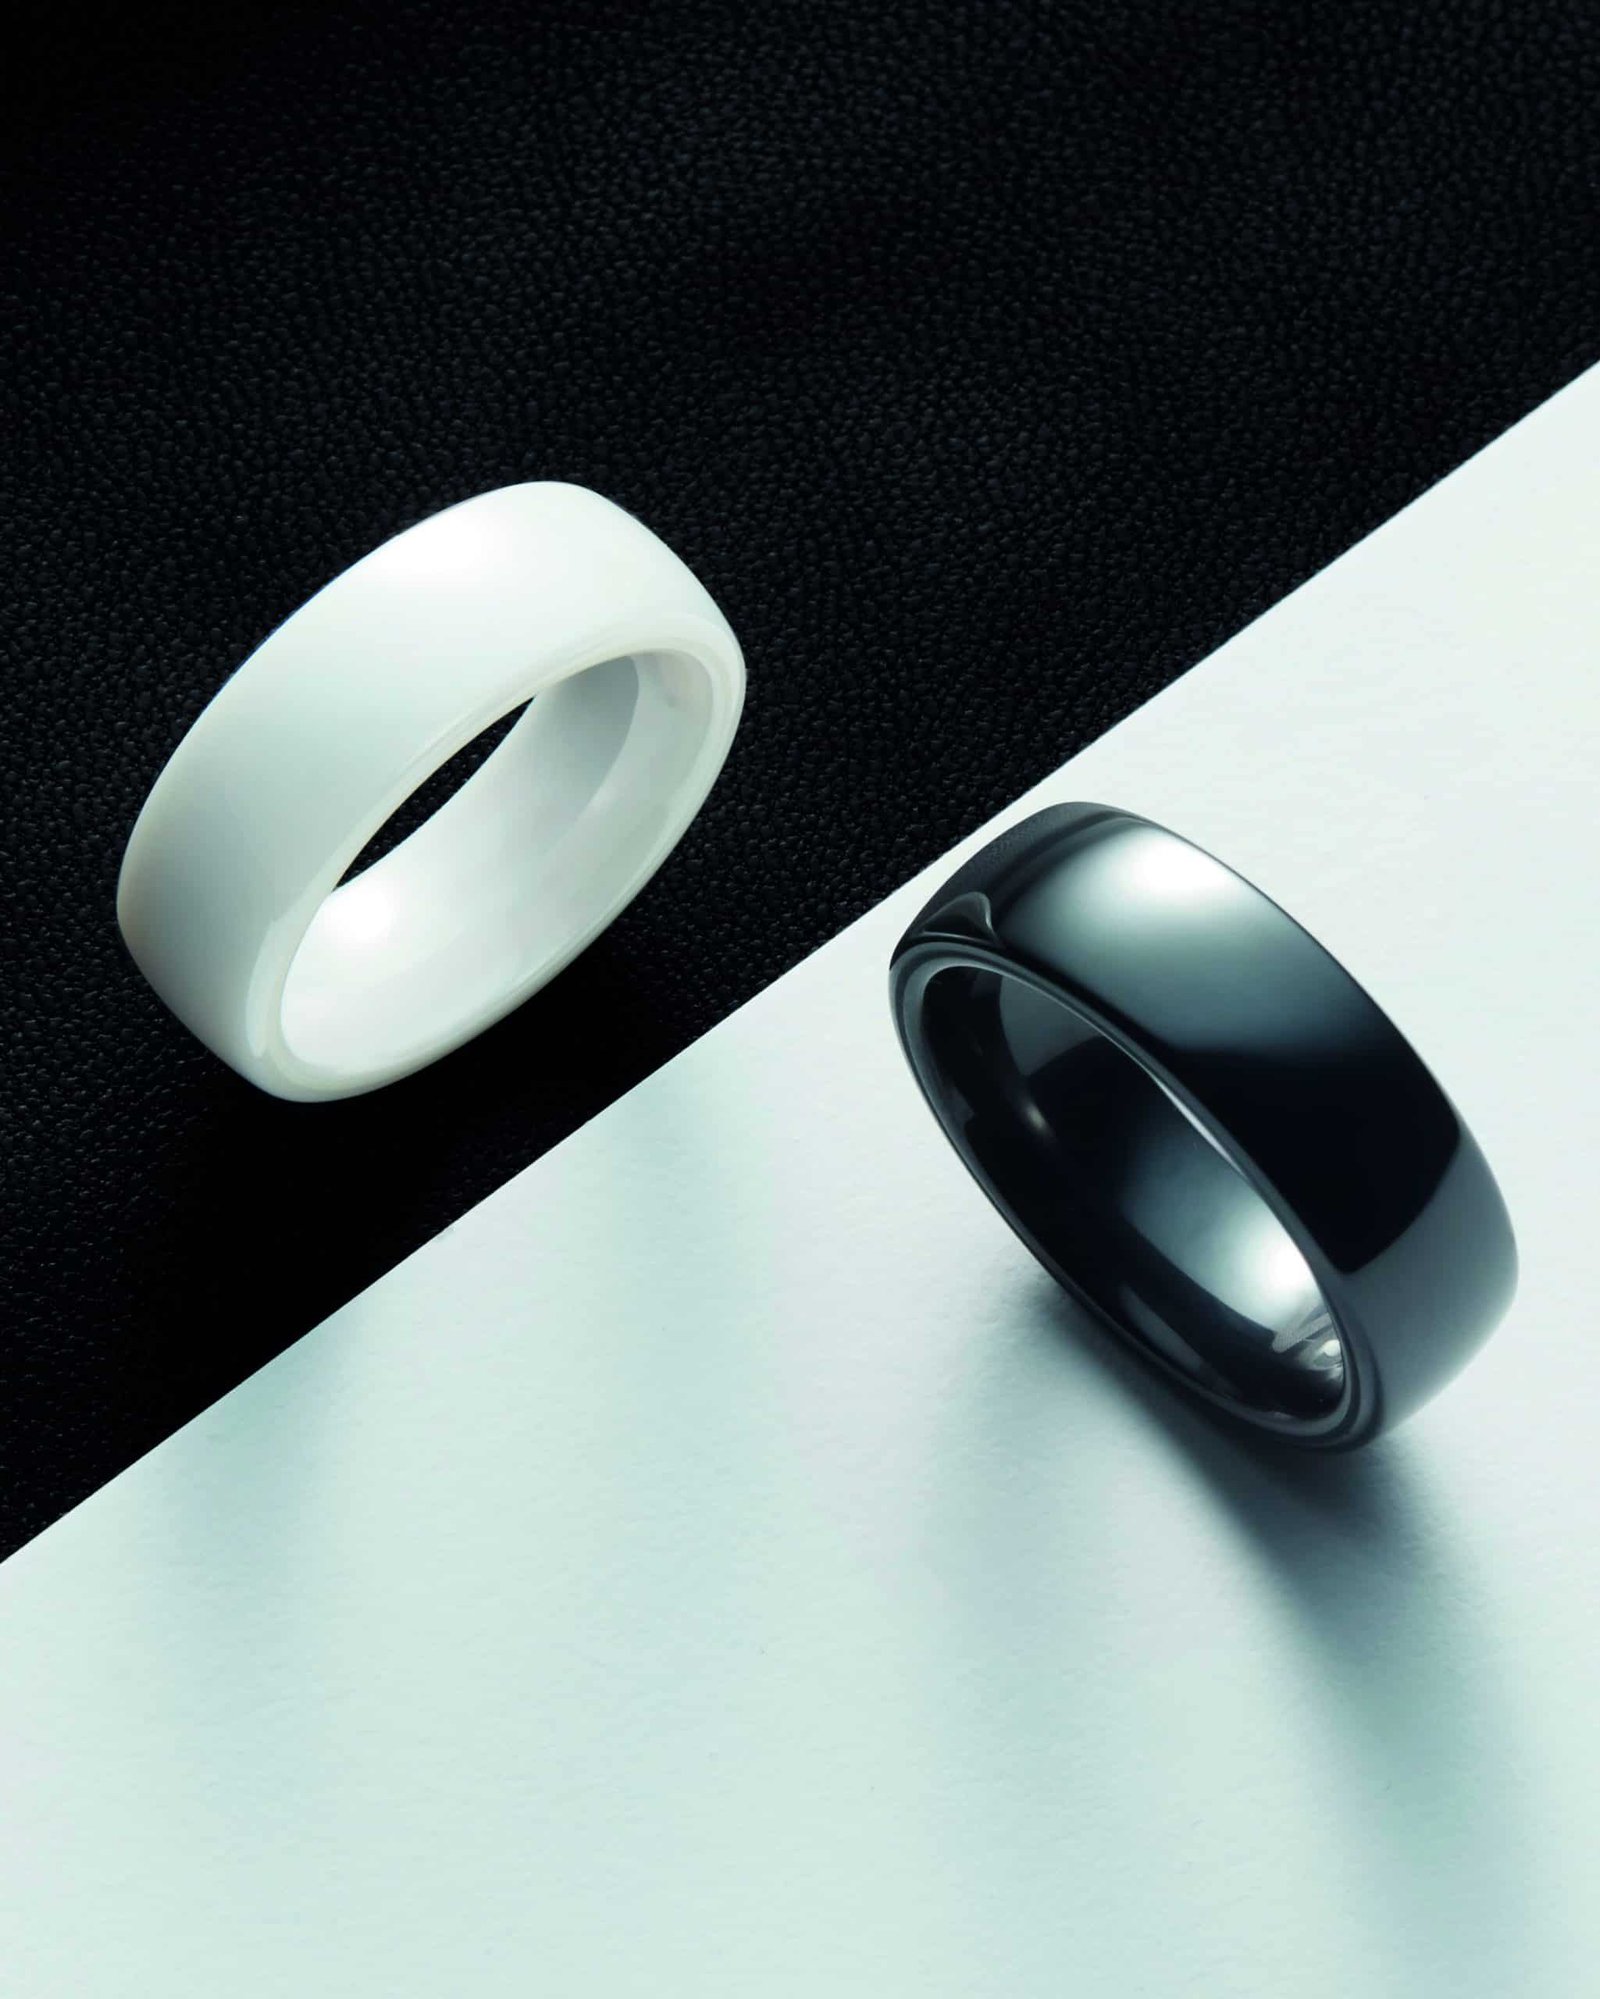 A ringing black and white ring on a surface.